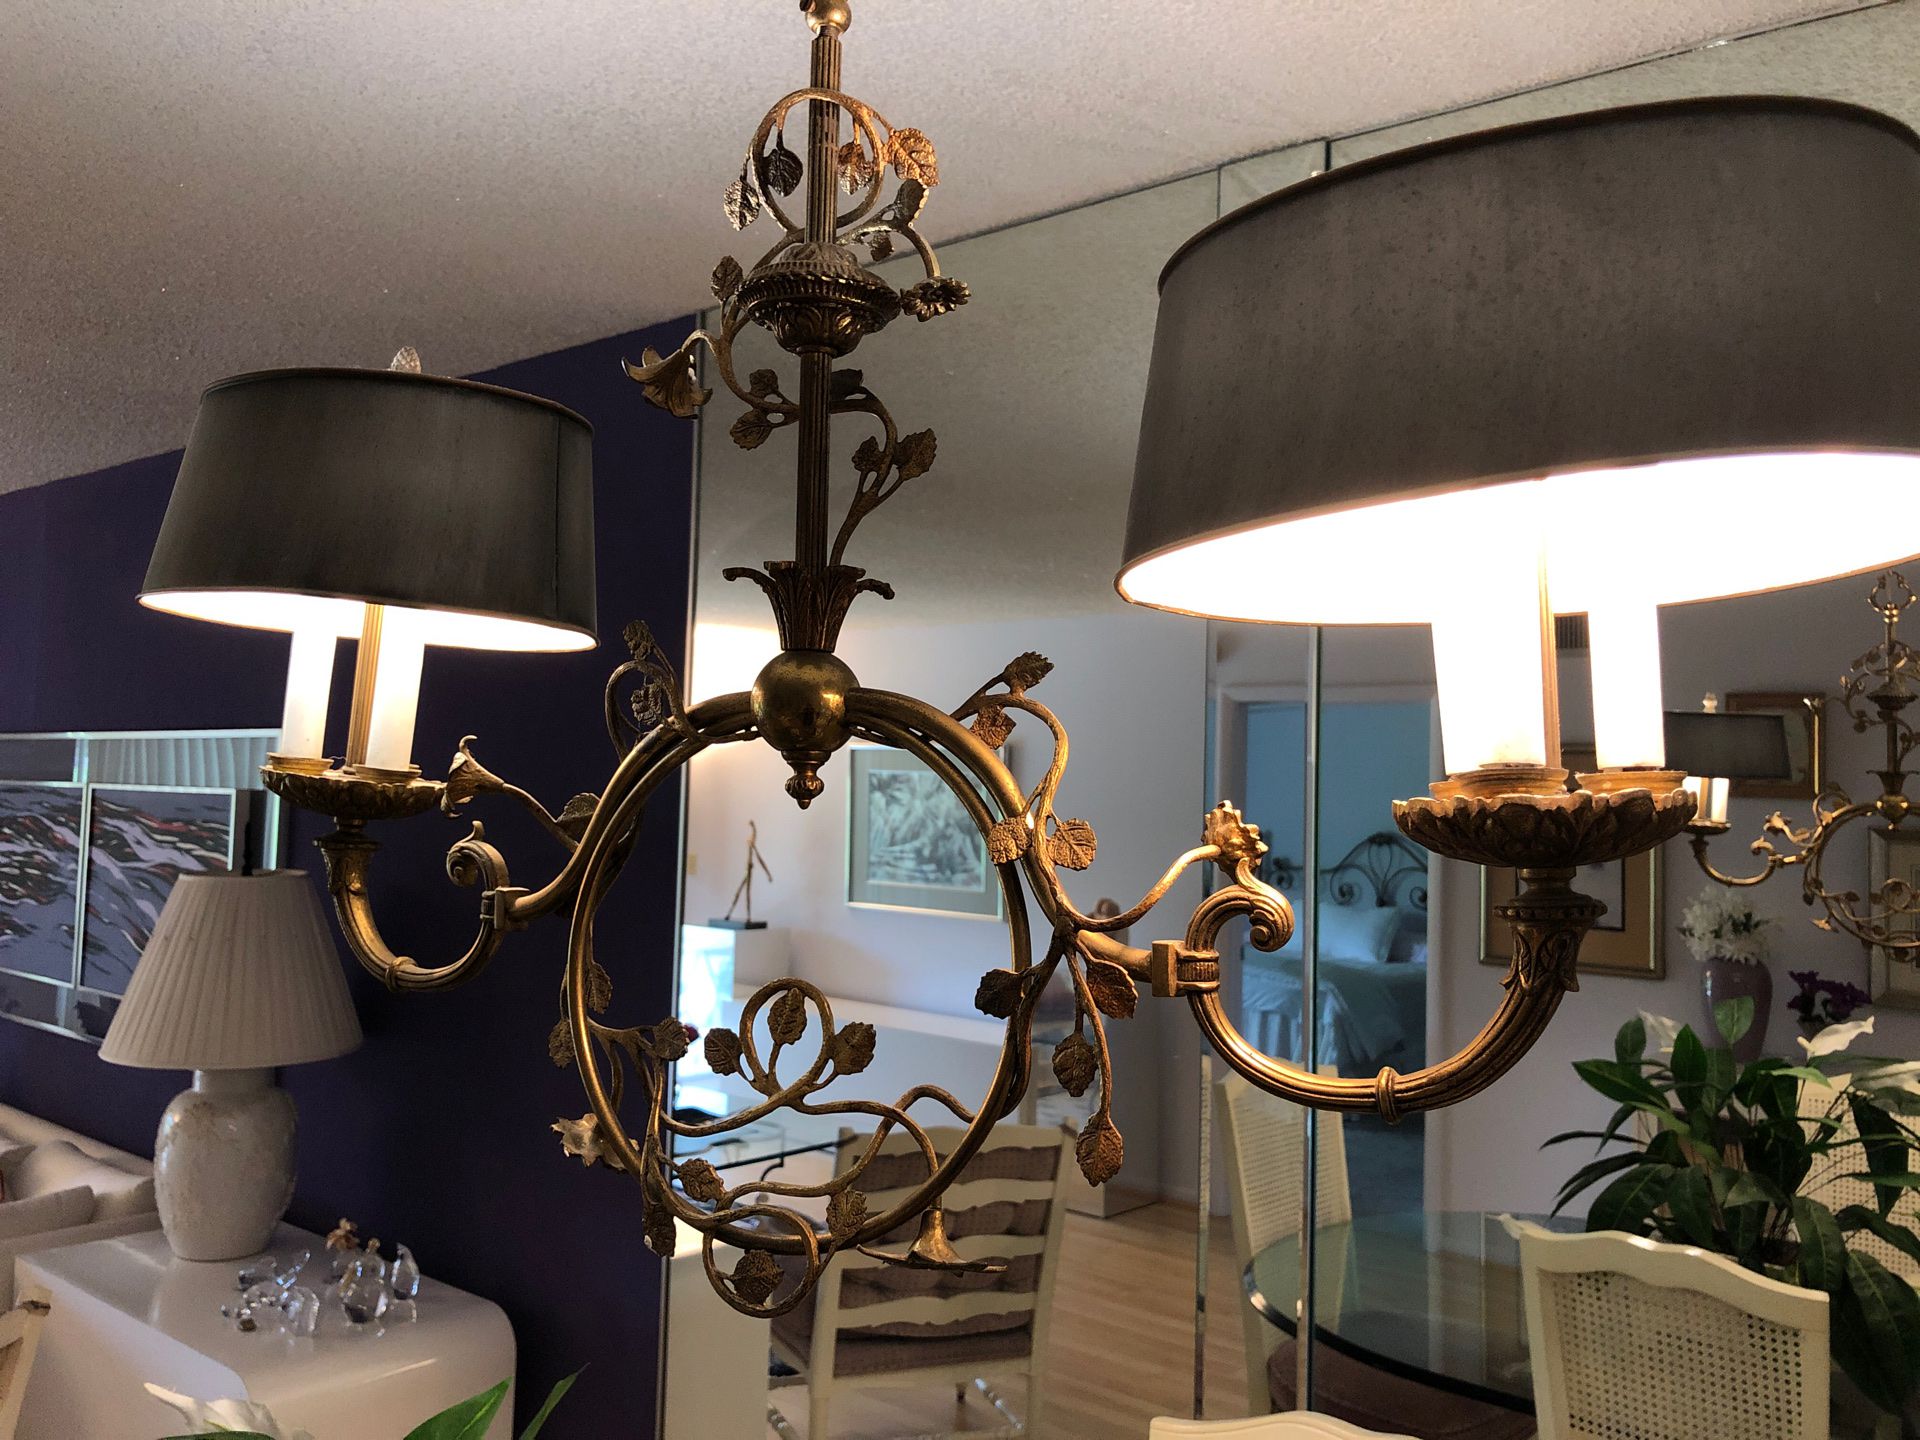 Antique brass and pewter chandelier